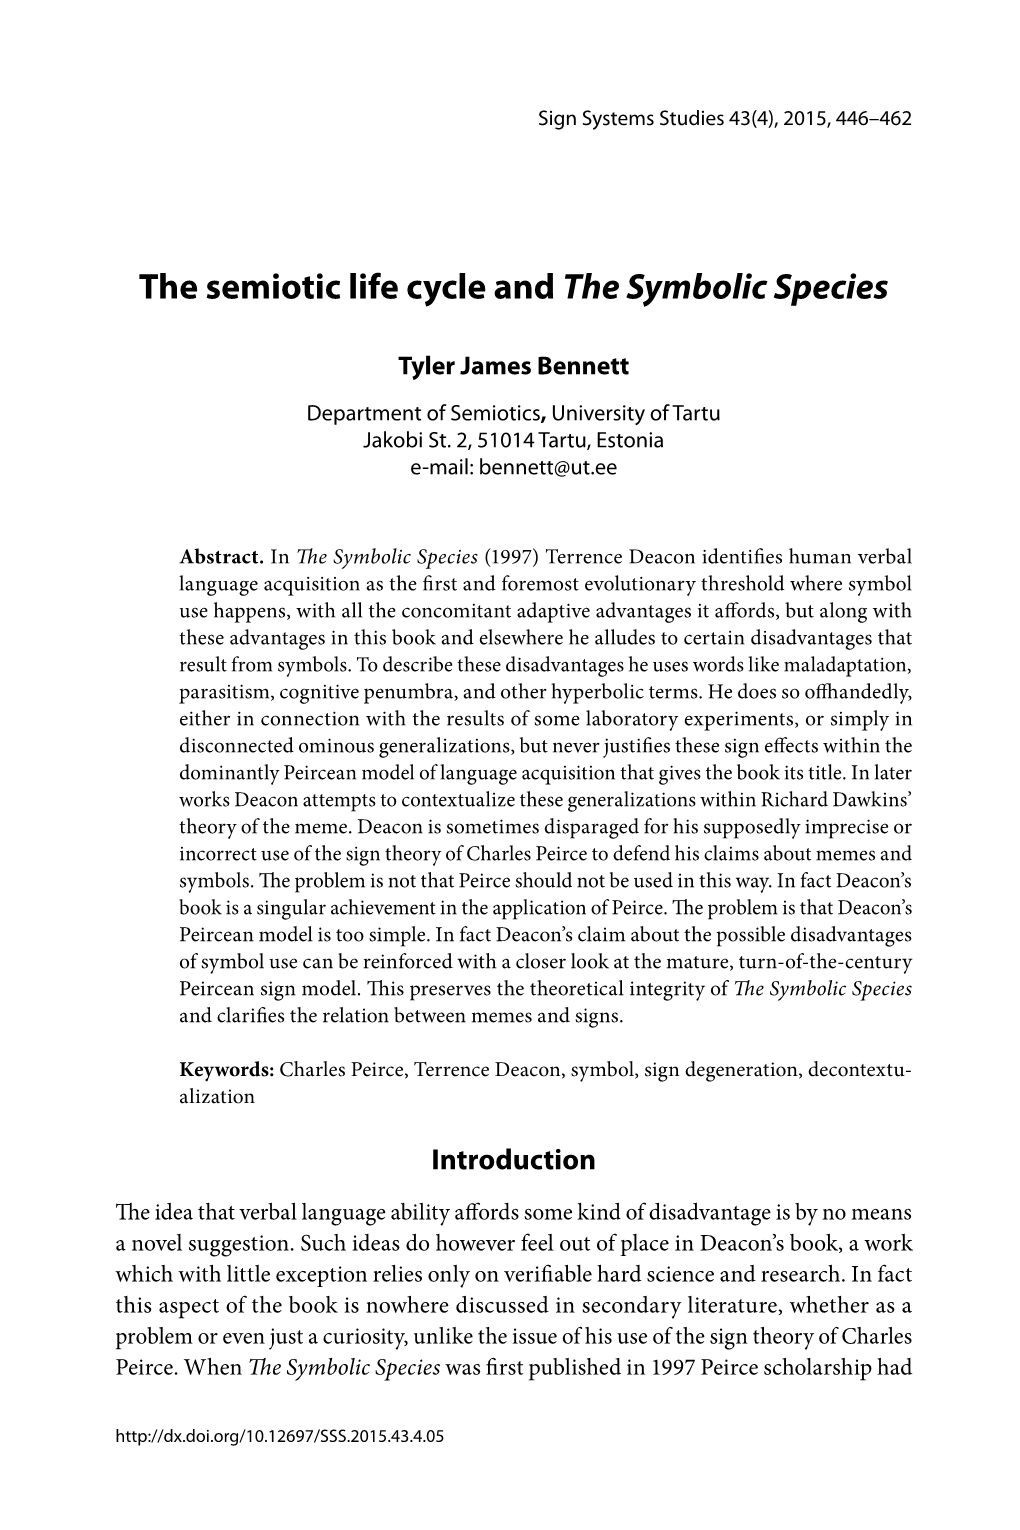 The Semiotic Life Cycle and the Symbolic Species